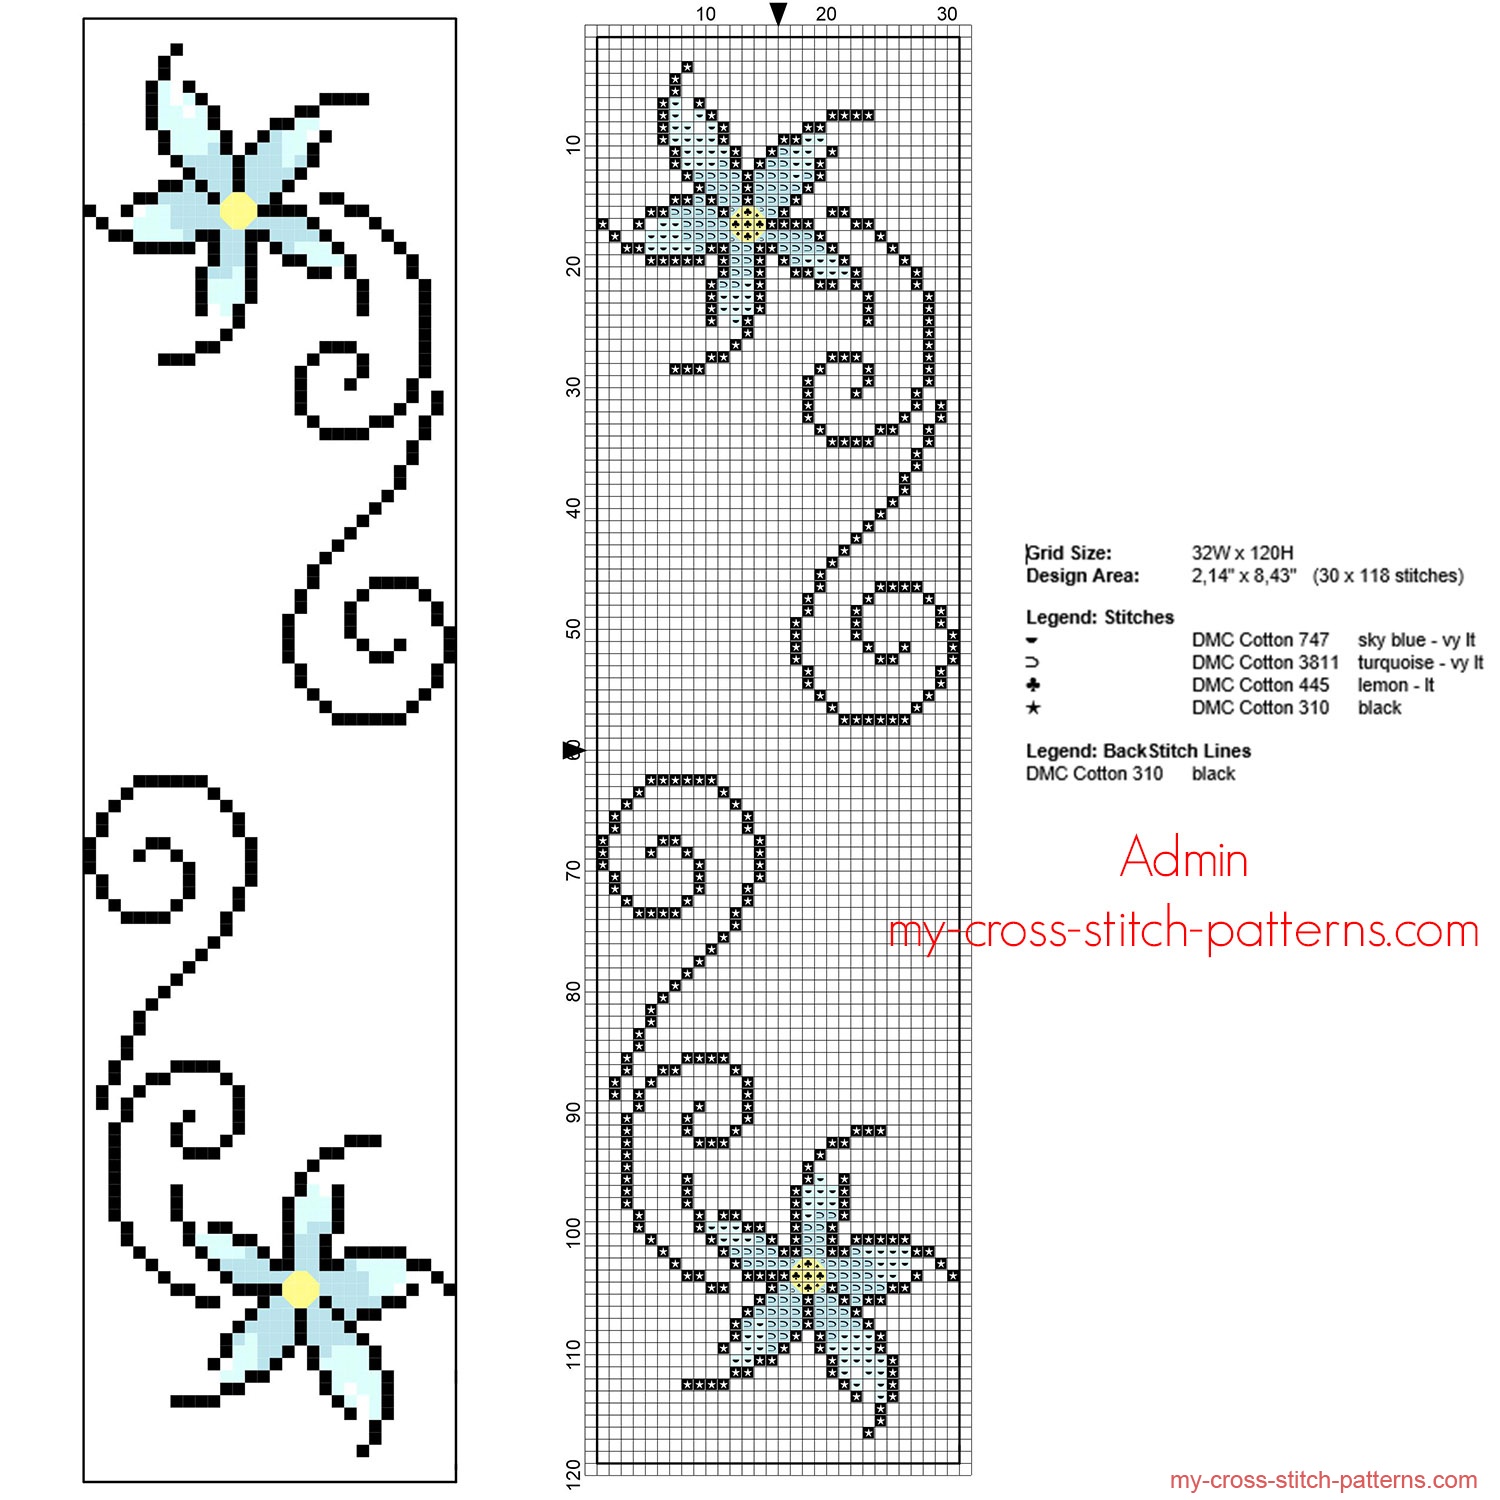 floral-cross-stitch-bookmark-with-small-stylised-light-blue-flowers